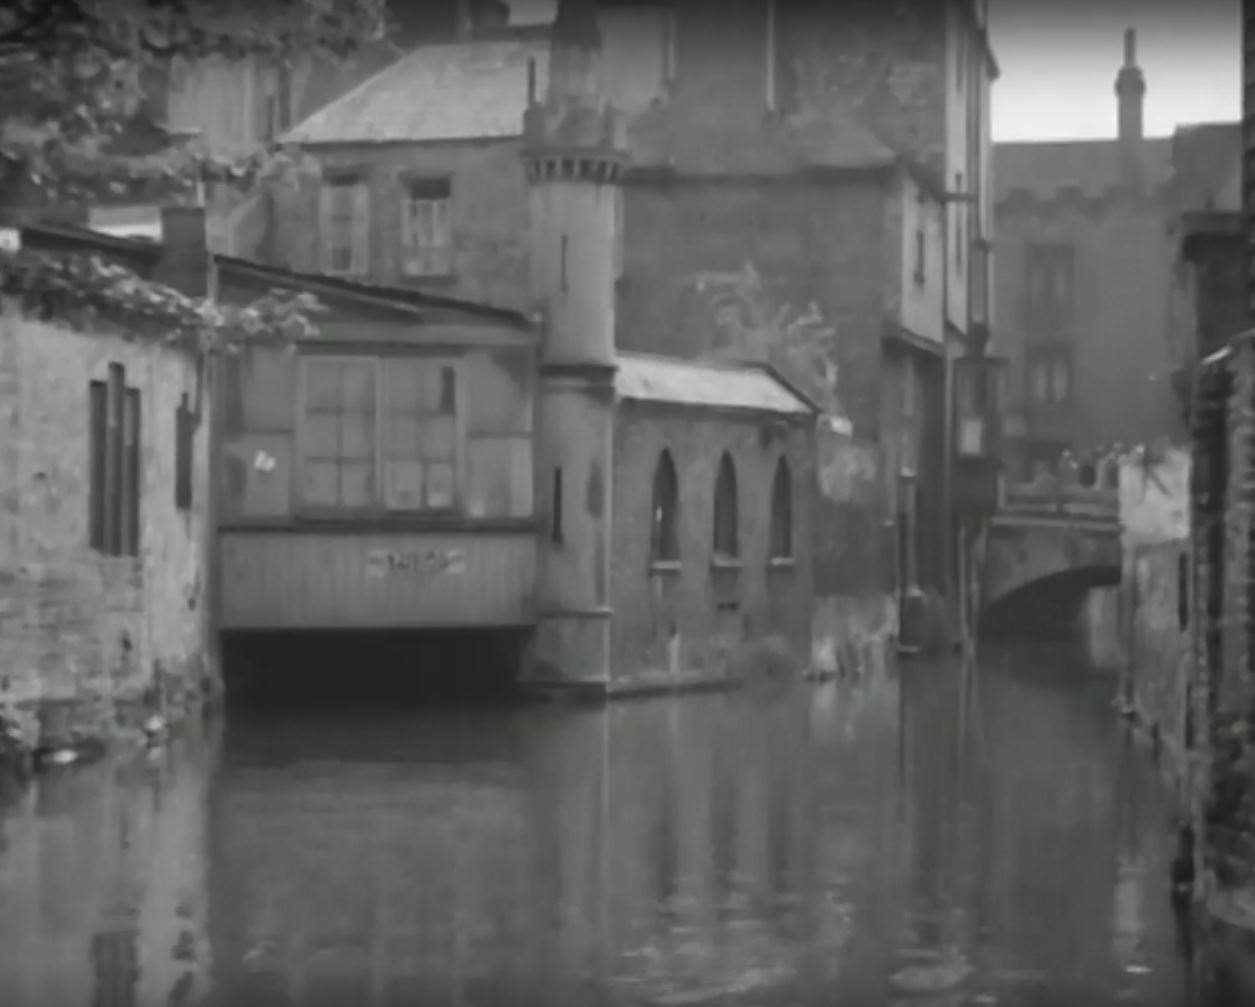 Canterbury as it looked back in 1936 when Freddie Laker was growing up